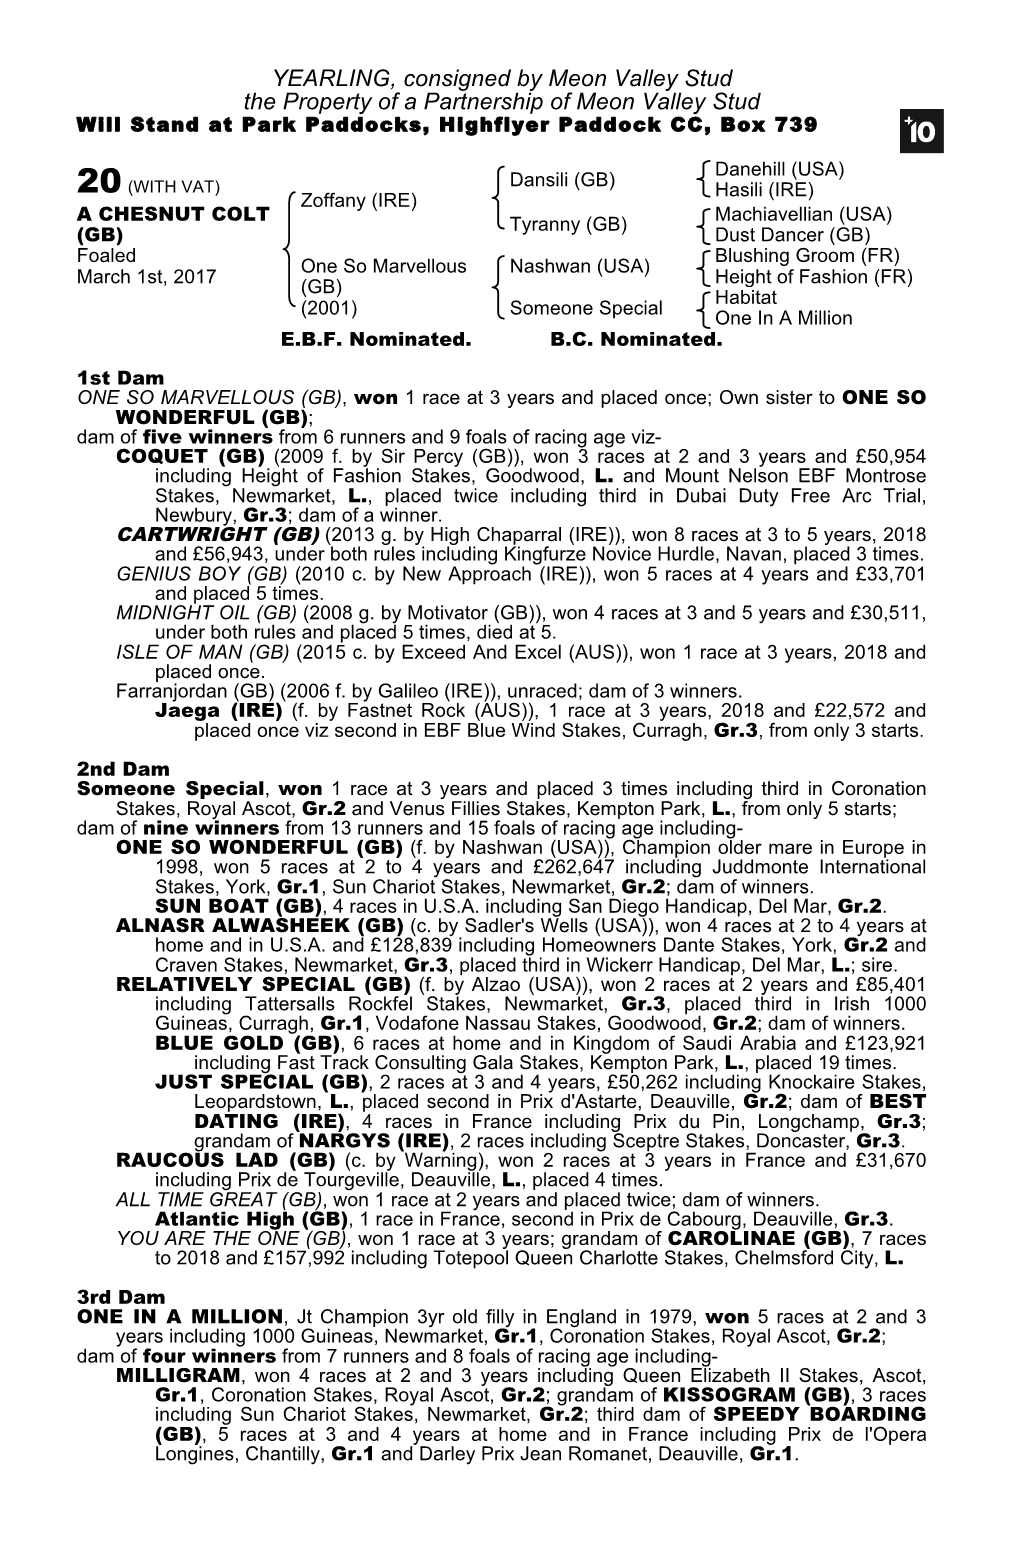 YEARLING, Consigned by Meon Valley Stud the Property of a Partnership of Meon Valley Stud Will Stand at Park Paddocks, Highflyer Paddock CC, Box 739